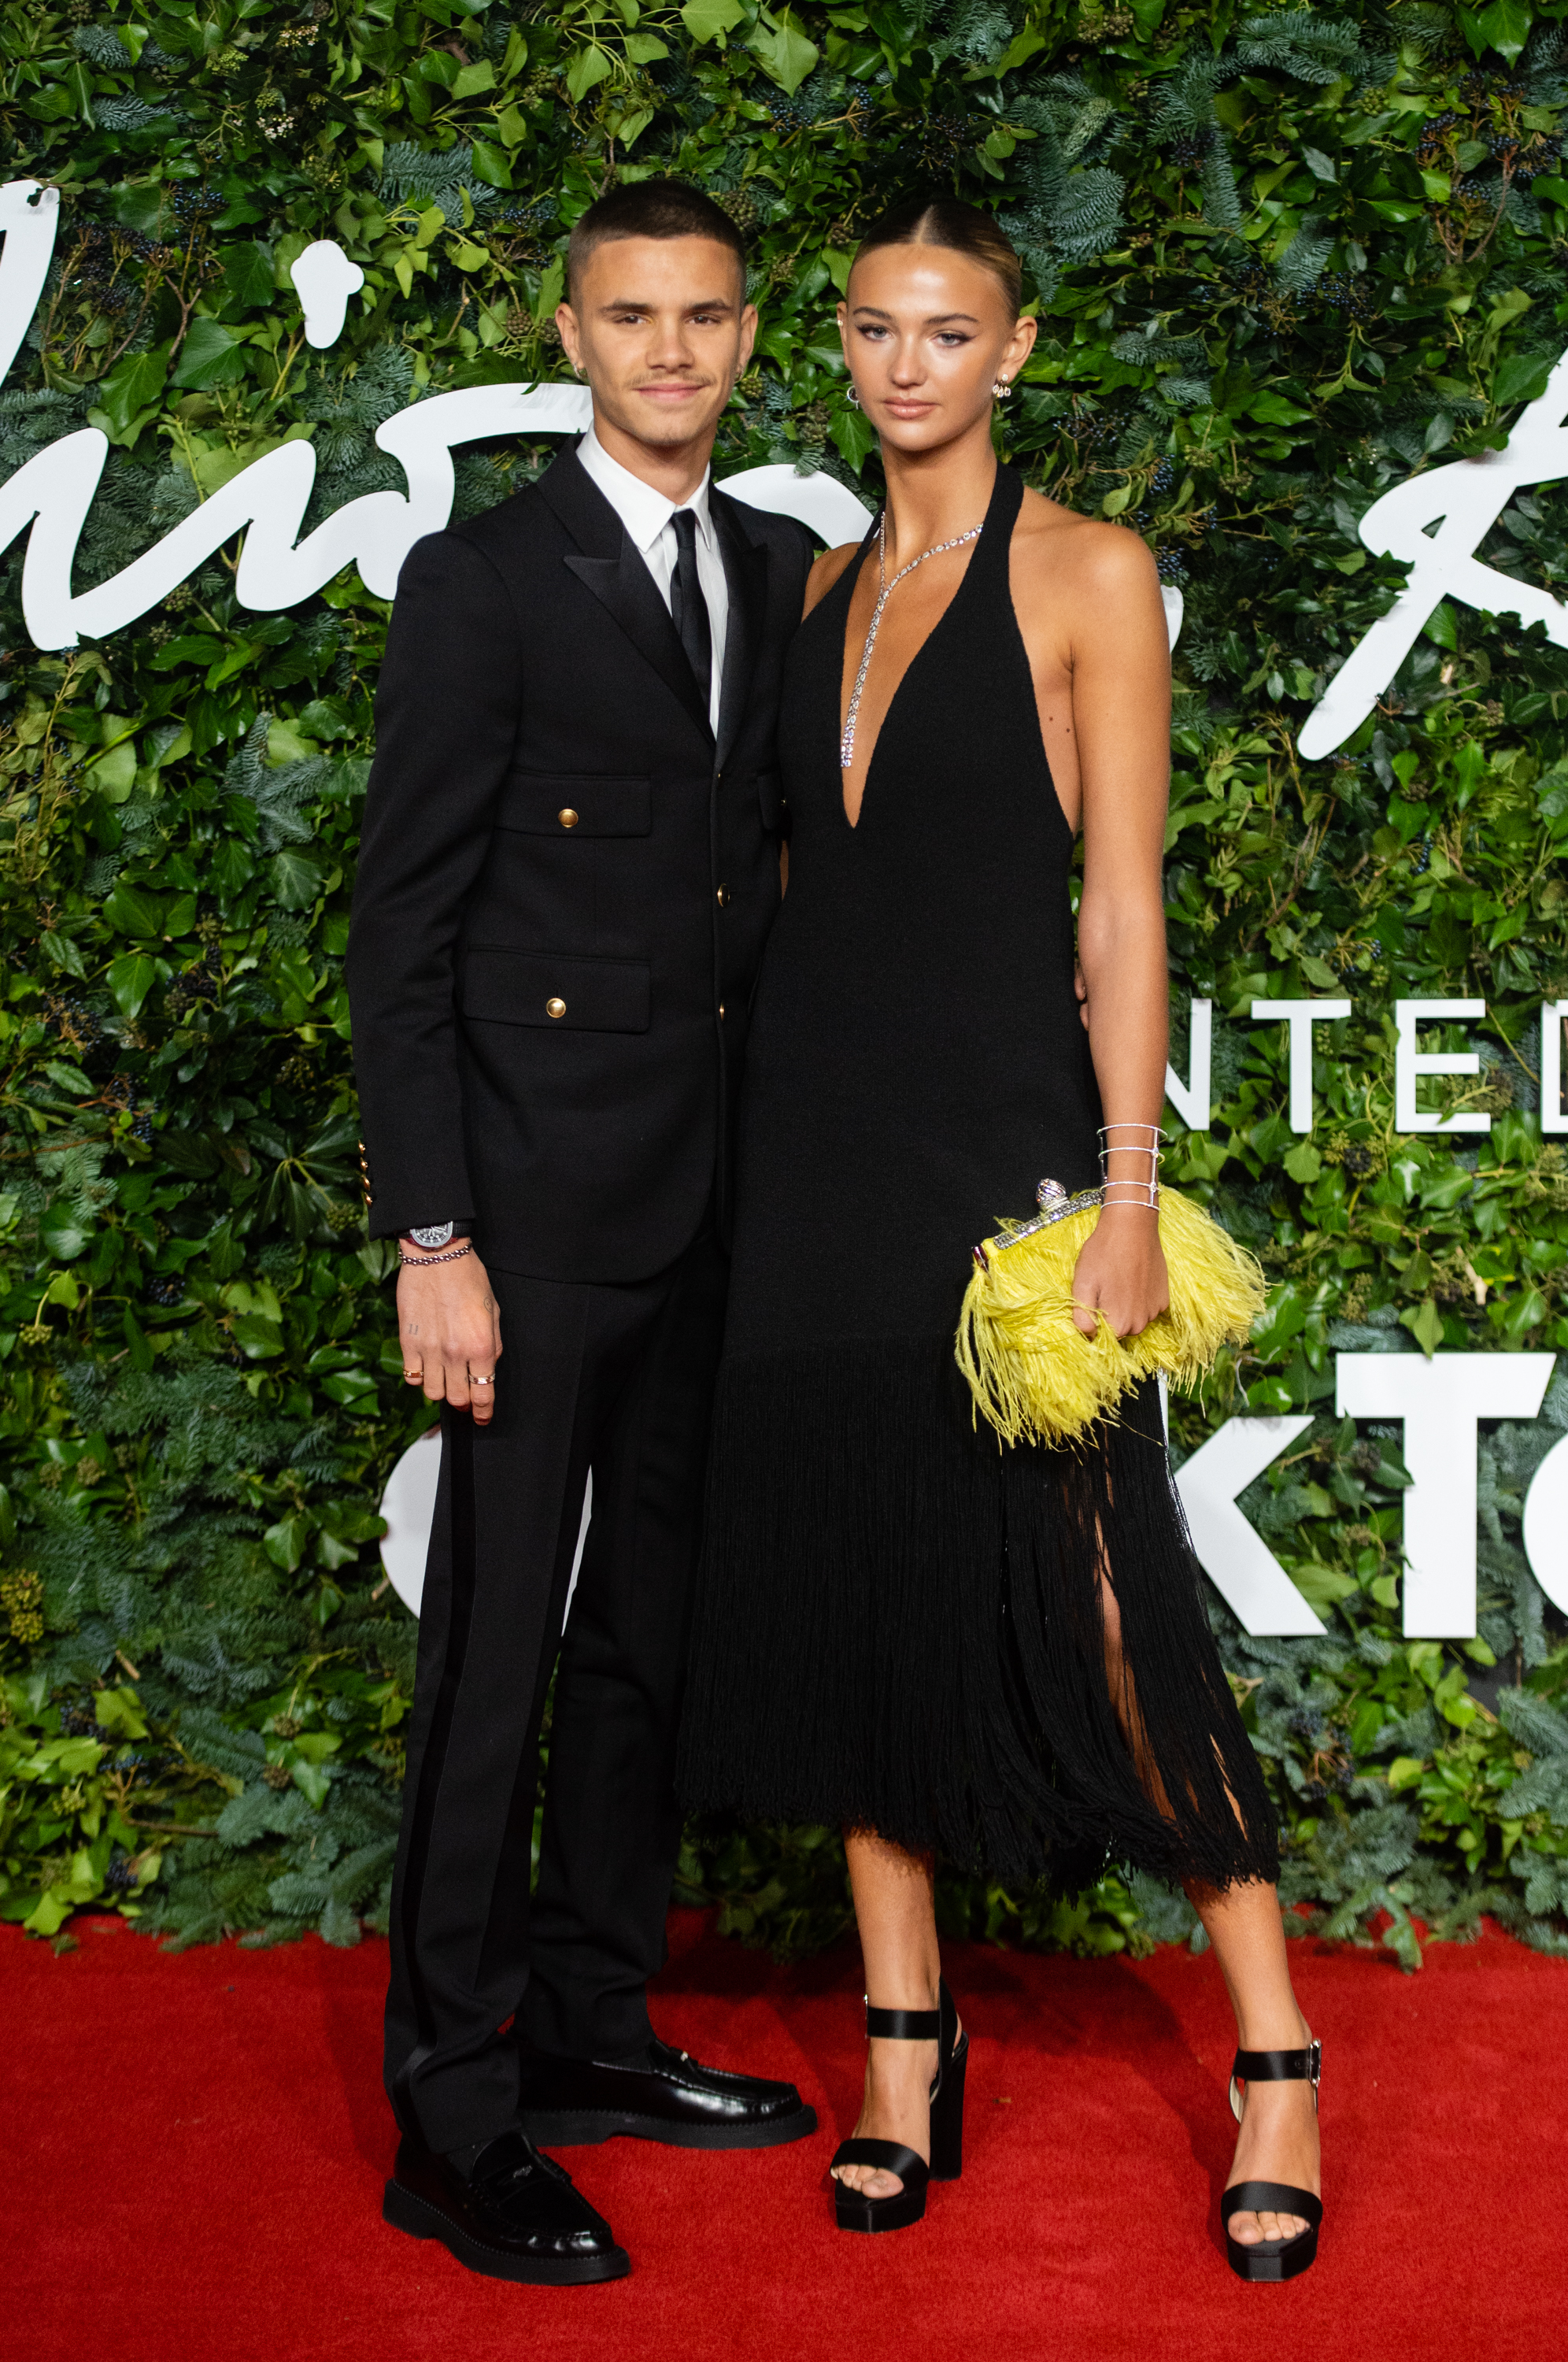 Romeo Beckham and Mia Regan at The British Fashion Awards in London, England, on November 29, 2021. | Source: Getty Images